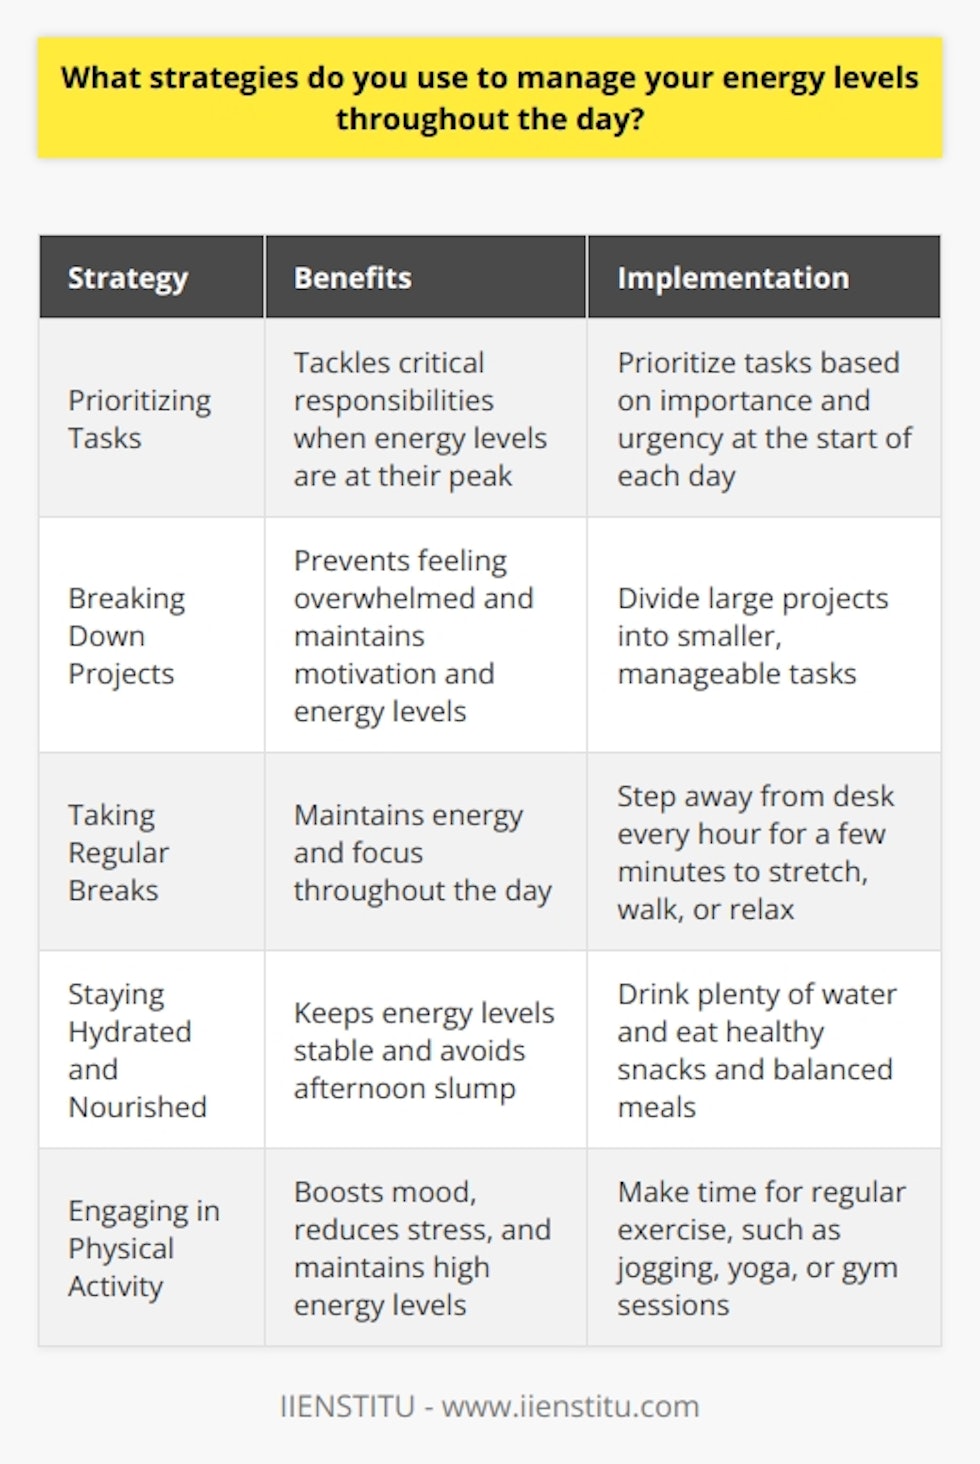 I have developed several strategies to effectively manage my energy levels throughout the day. These techniques help me stay focused, productive, and maintain a positive attitude in both my personal and professional life. Prioritizing Tasks I start each day by prioritizing my tasks based on their importance and urgency. This allows me to tackle the most critical responsibilities when my energy levels are at their peak, typically in the morning. Breaking Down Projects When faced with large projects, I break them down into smaller, manageable tasks. This approach prevents me from feeling overwhelmed and helps maintain my motivation and energy levels. Taking Regular Breaks I have learned that taking regular breaks is crucial for maintaining my energy and focus. I step away from my desk every hour or so, even if its just for a few minutes, to stretch, walk around, or engage in a brief relaxation exercise. Staying Hydrated and Nourished I make sure to stay hydrated by drinking plenty of water throughout the day. I also eat healthy snacks and balanced meals to keep my energy levels stable and avoid the dreaded afternoon slump. Engaging in Physical Activity Regular exercise has been a game-changer for me in terms of energy management. I make time for physical activity, whether its a morning jog, a lunchtime yoga class, or an evening gym session. Exercise boosts my mood, reduces stress, and helps me maintain high energy levels throughout the day. By implementing these strategies, I have found that I am better equipped to handle the demands of my job and personal life, while maintaining a consistent level of energy and enthusiasm.